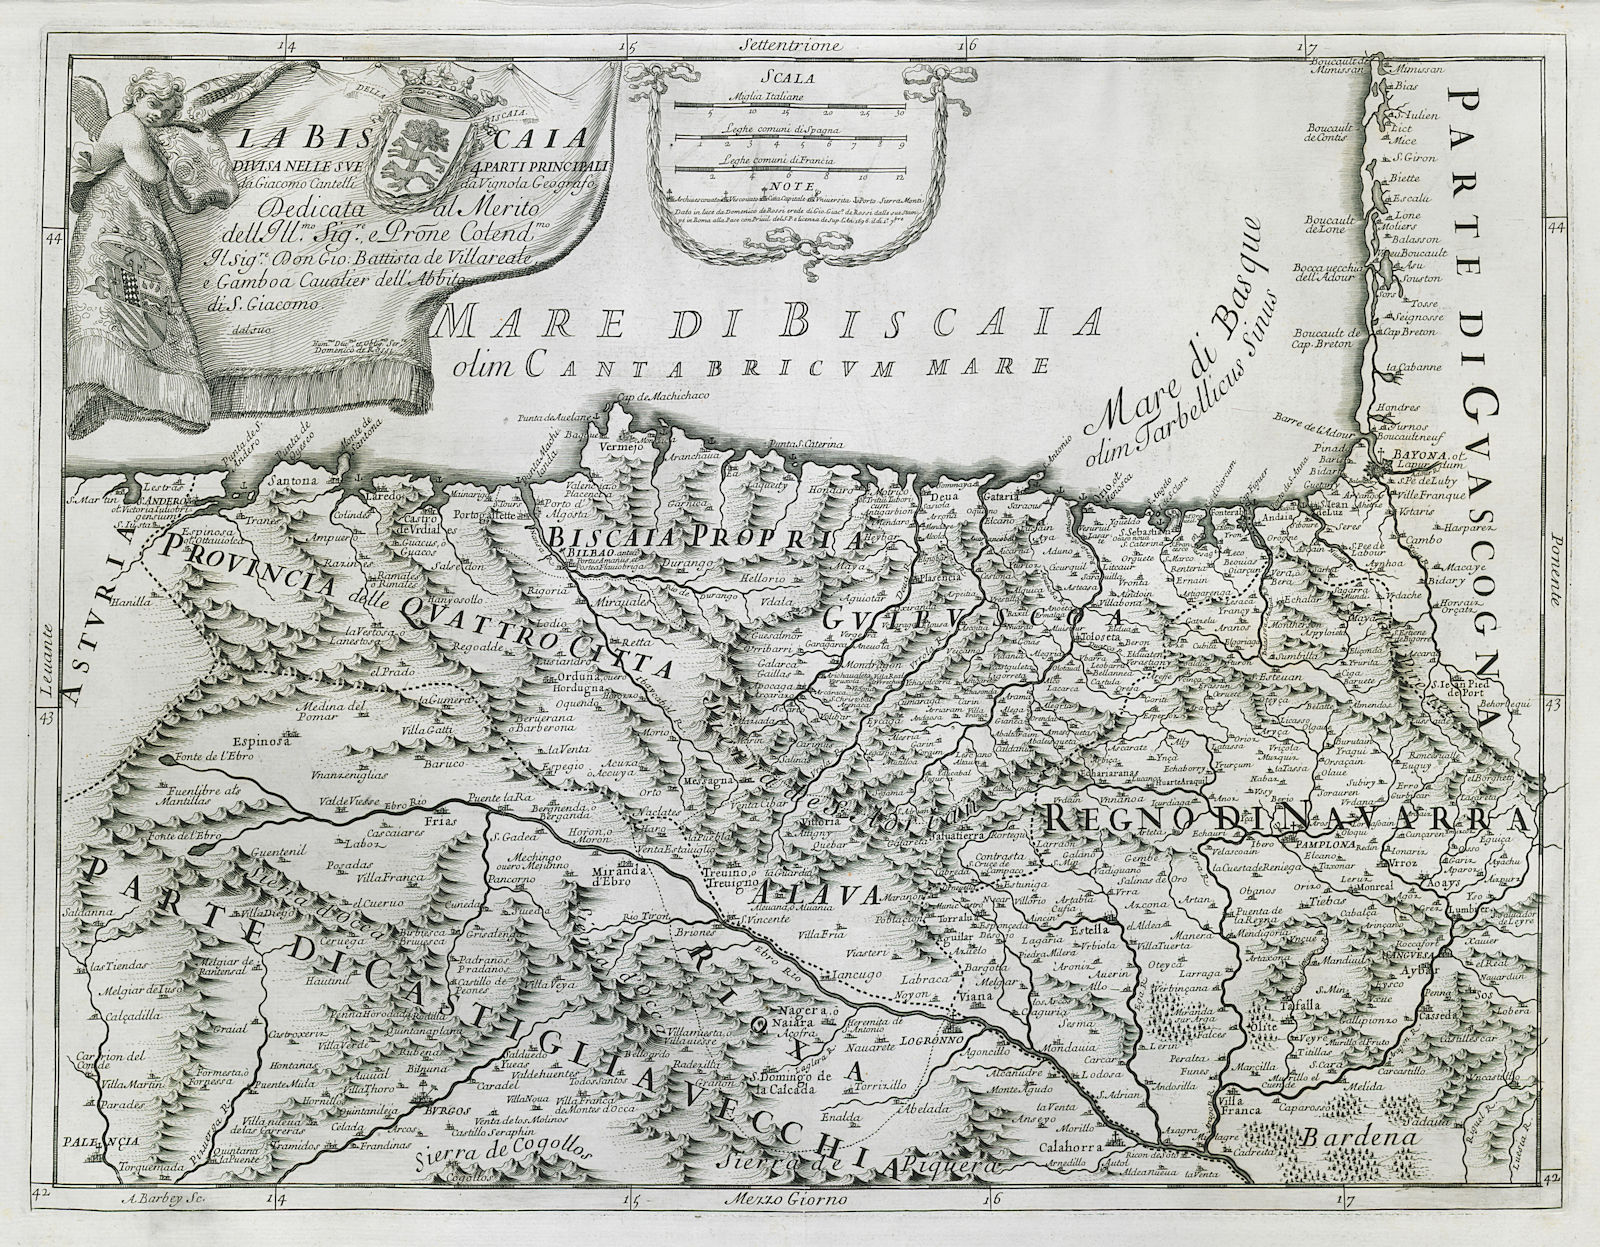 La Biscaia. Biscay / Vizcaya. Spanish Basque country. ROSSI / CANTELLI 1696 map